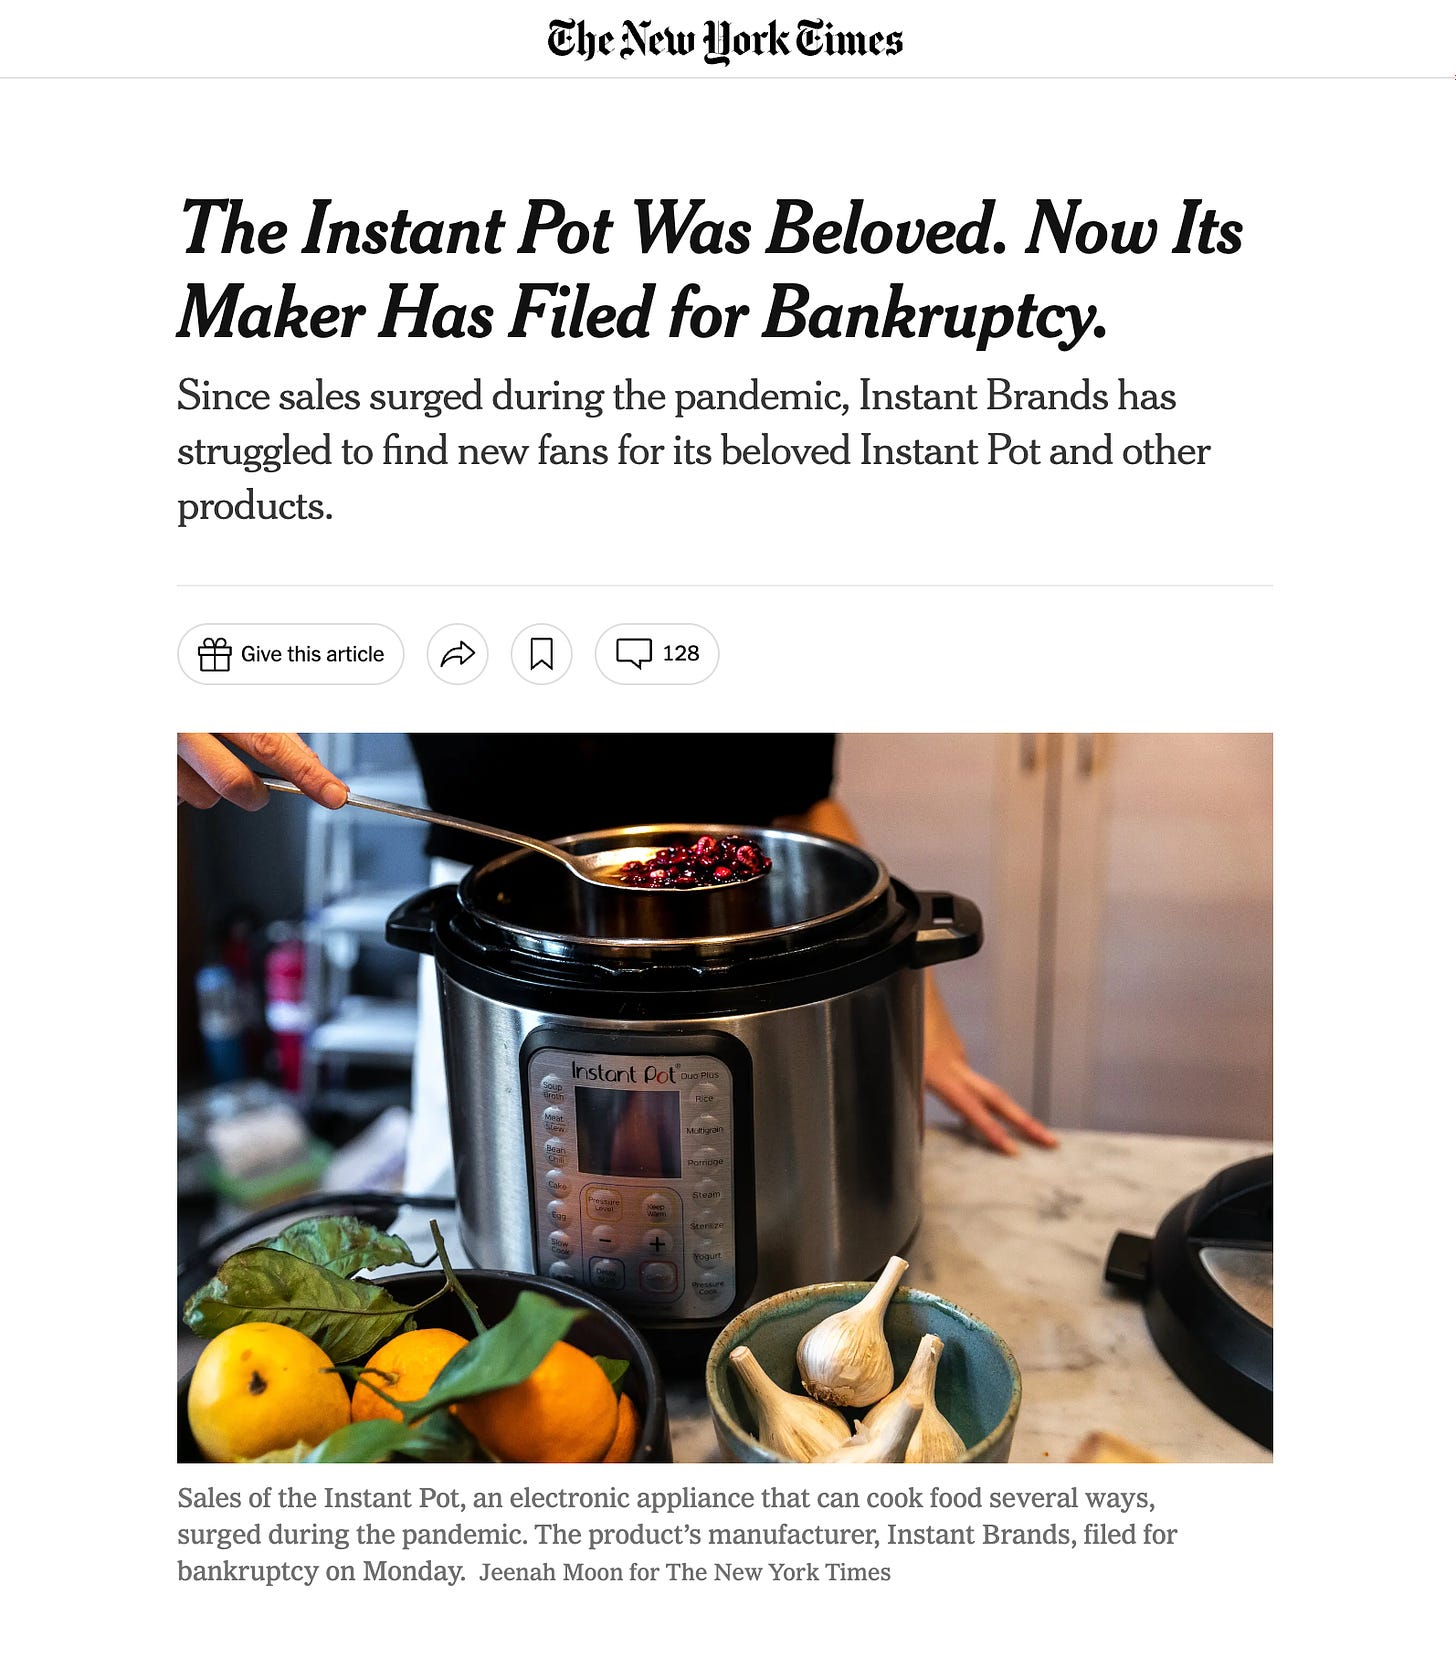 The Instant Pot Was Beloved. Now Its Maker Has Filed for Bankruptcy. Since sales surged during the pandemic, Instant Brands has struggled to find new fans for its beloved Instant Pot and other products.